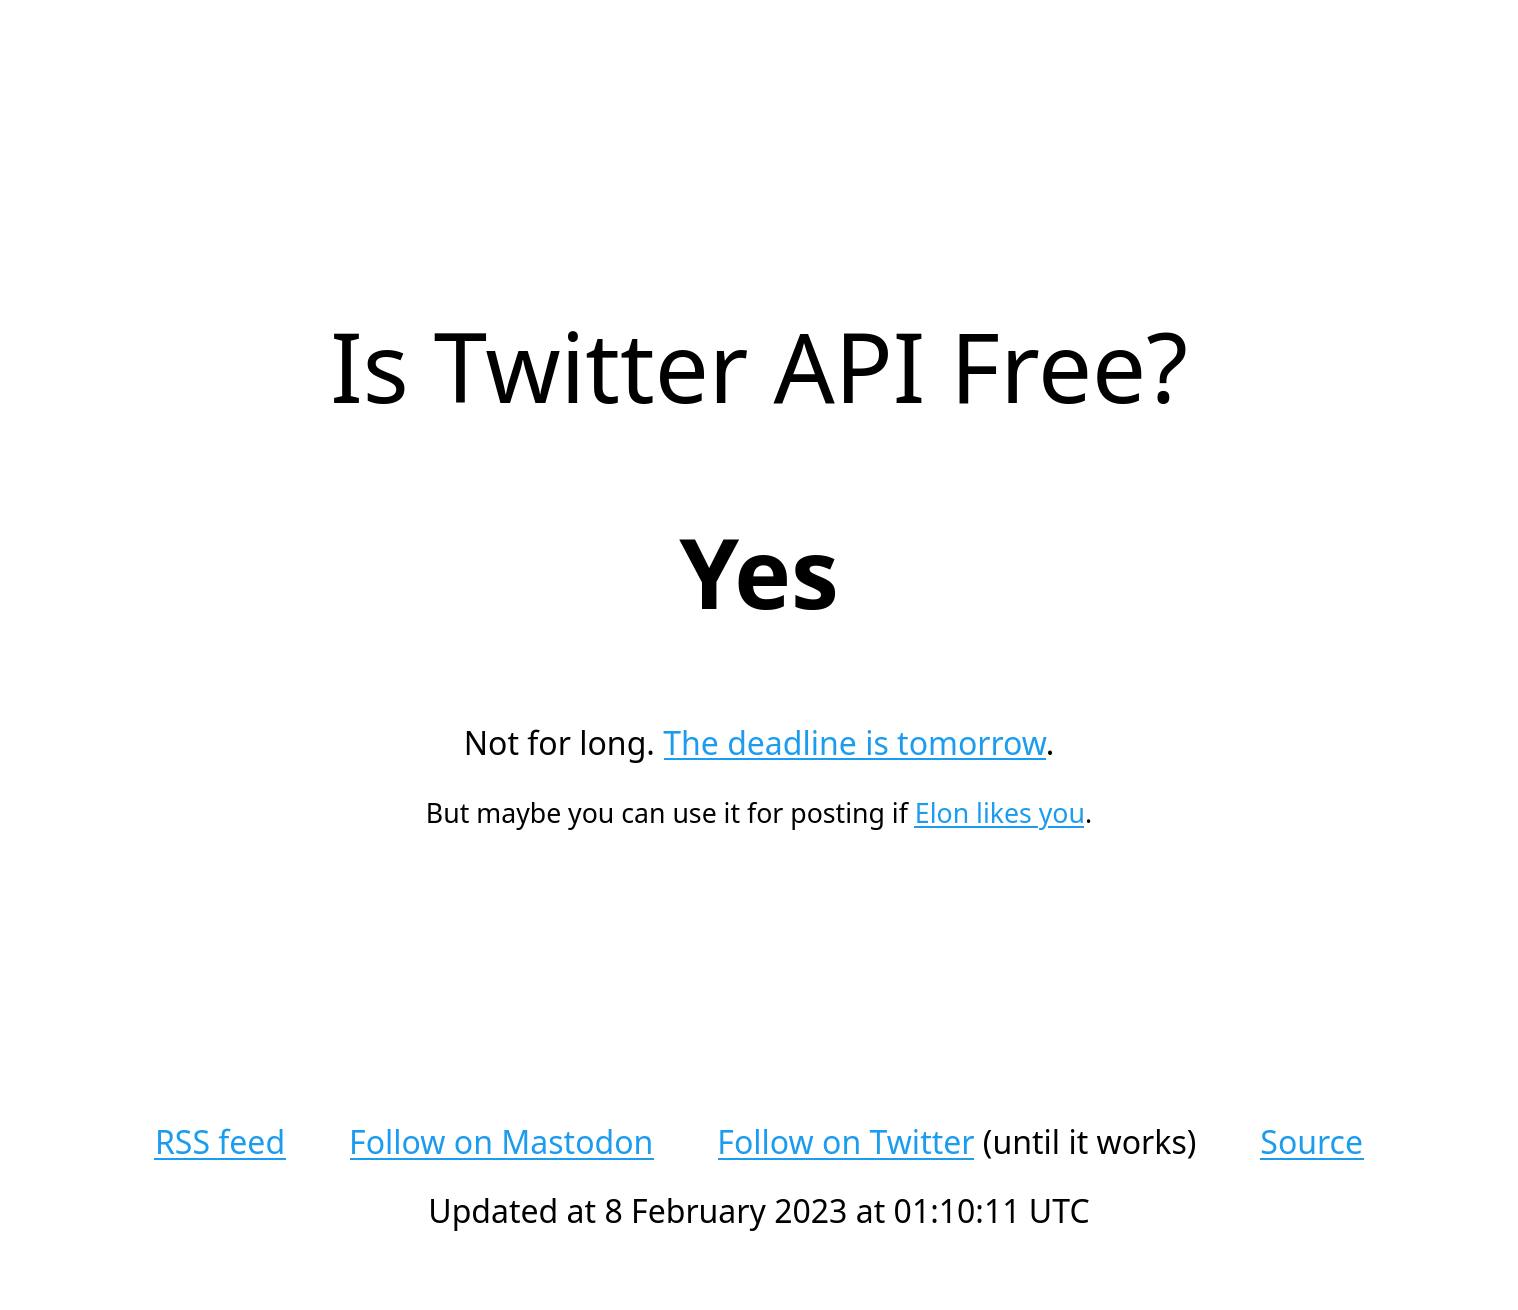 Screenshot of the website: Is Twitter API free? Yes. Not for long. The deadline is tomorrow. But maybe you can use it for posting if Elon likes you